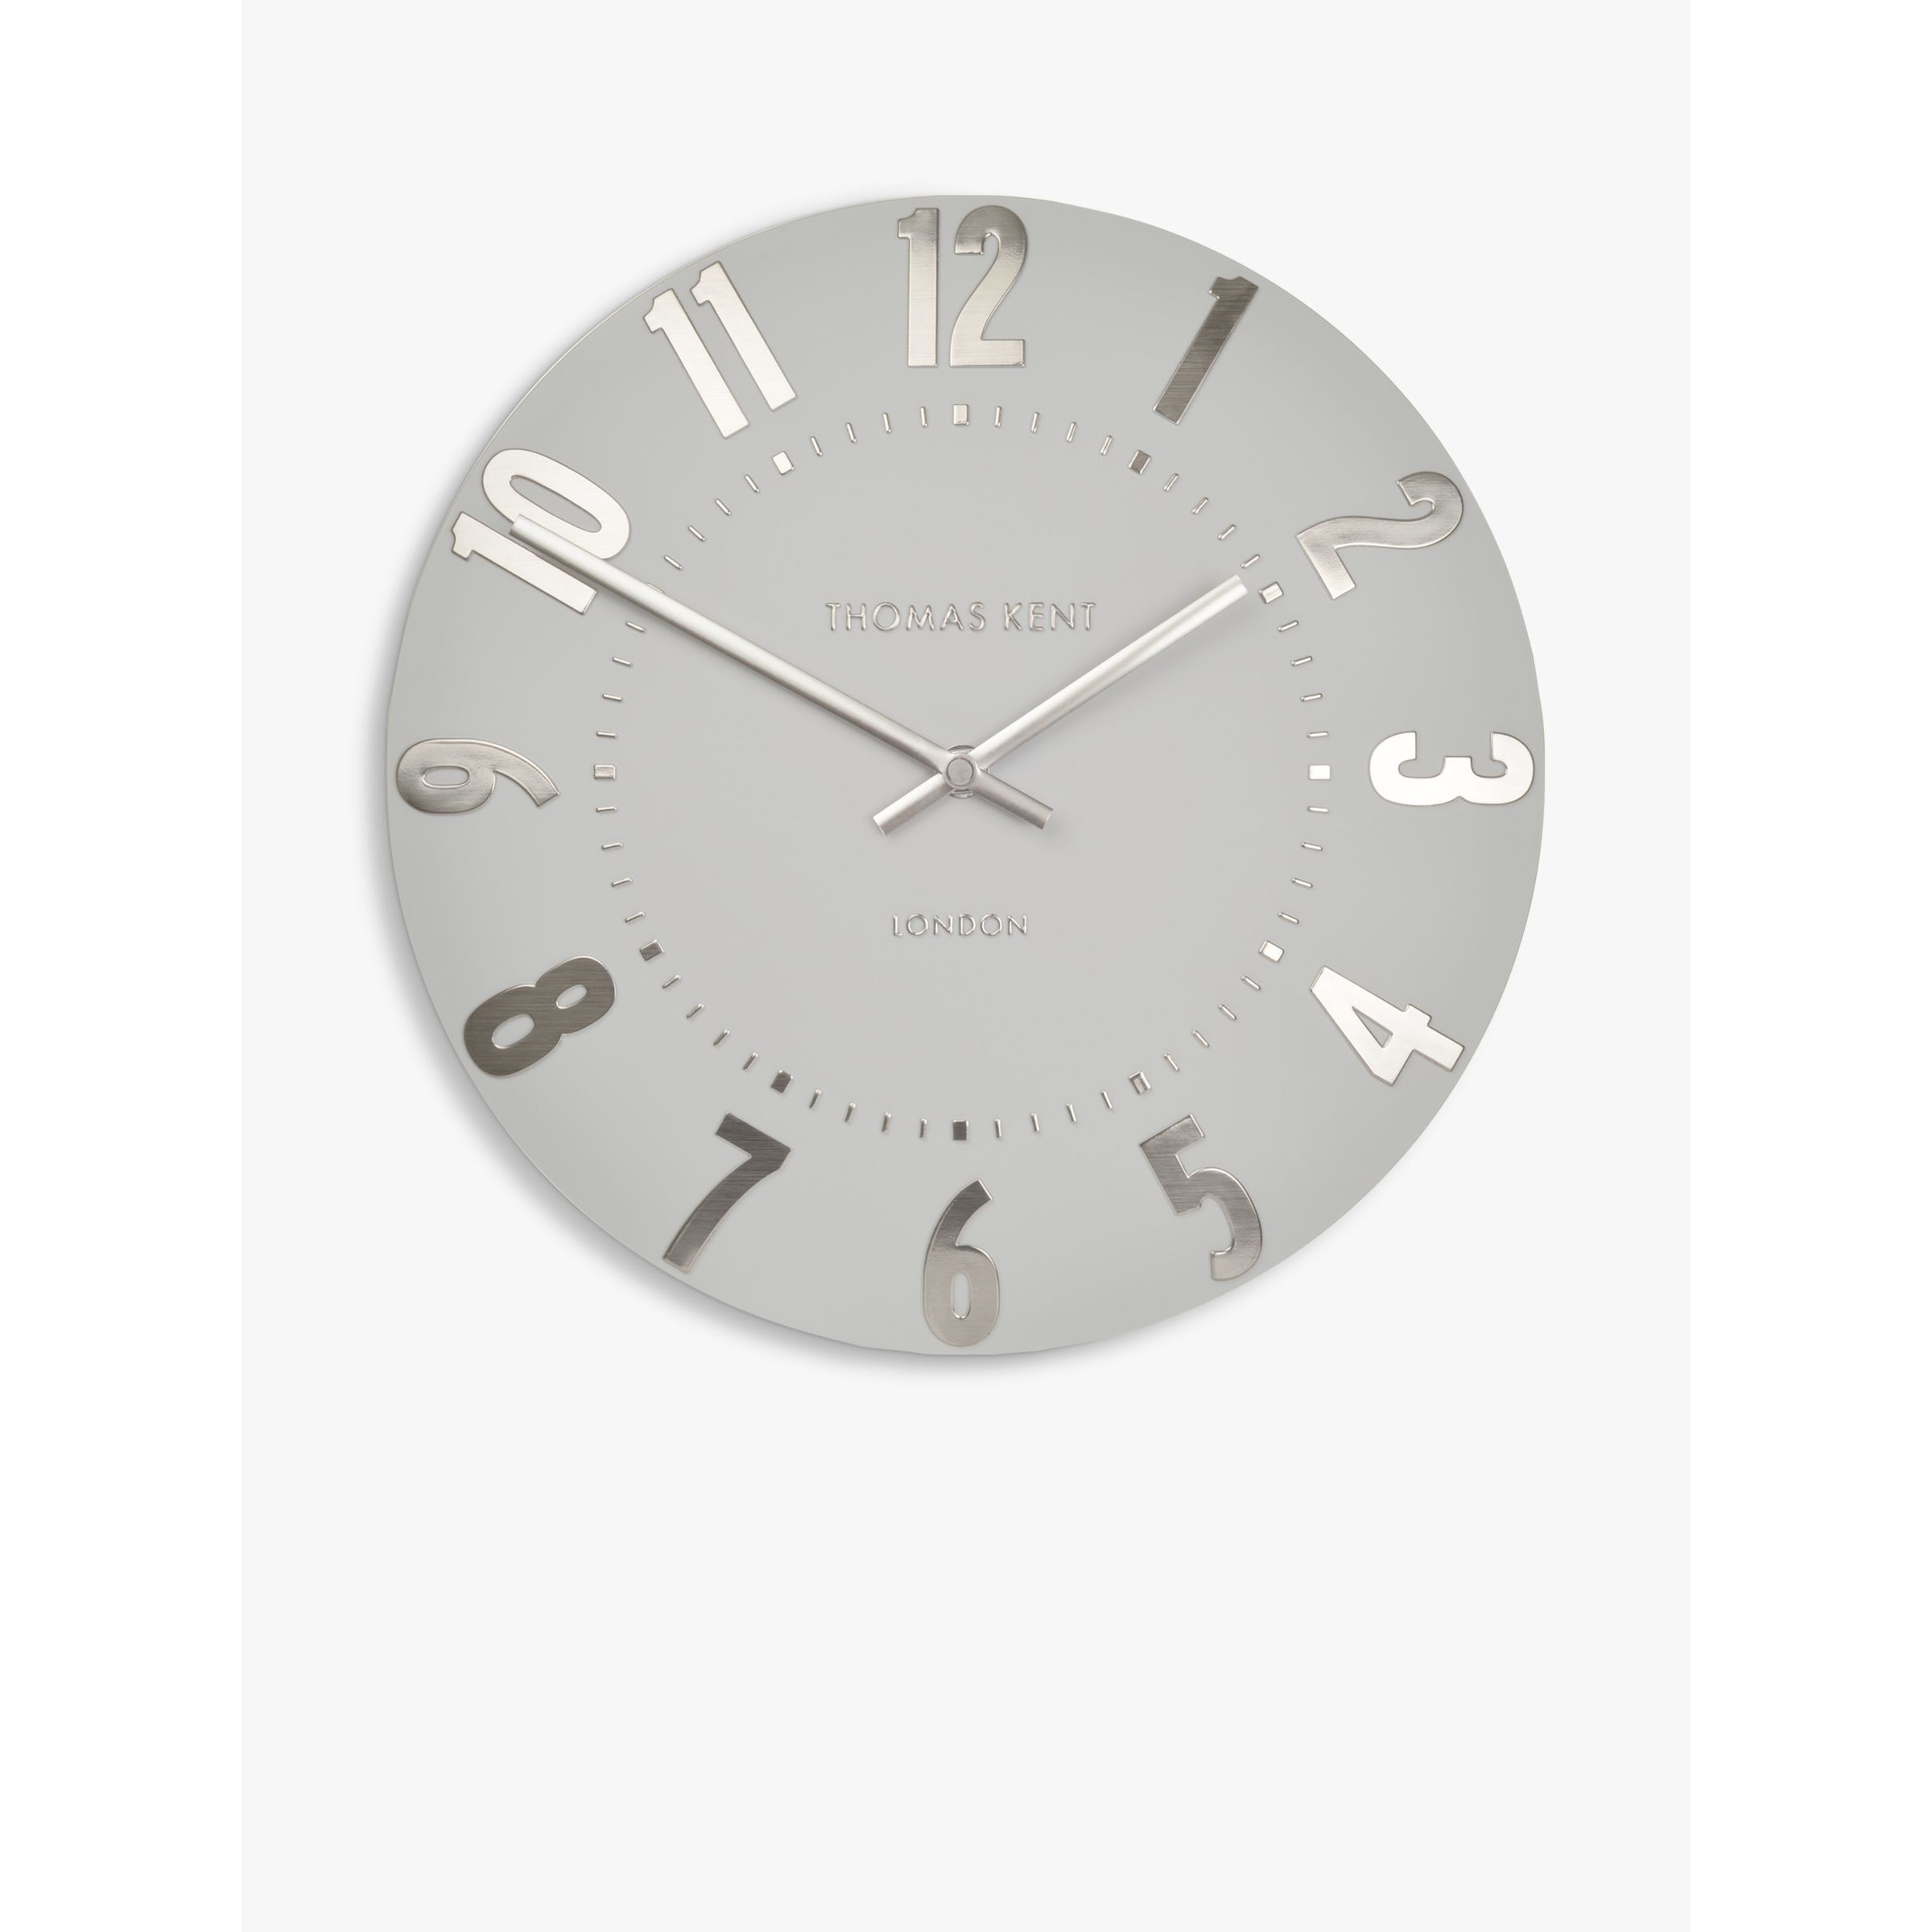 Thomas Kent Mulberry Wall Clock, 30cm, Silver Cloud - image 1